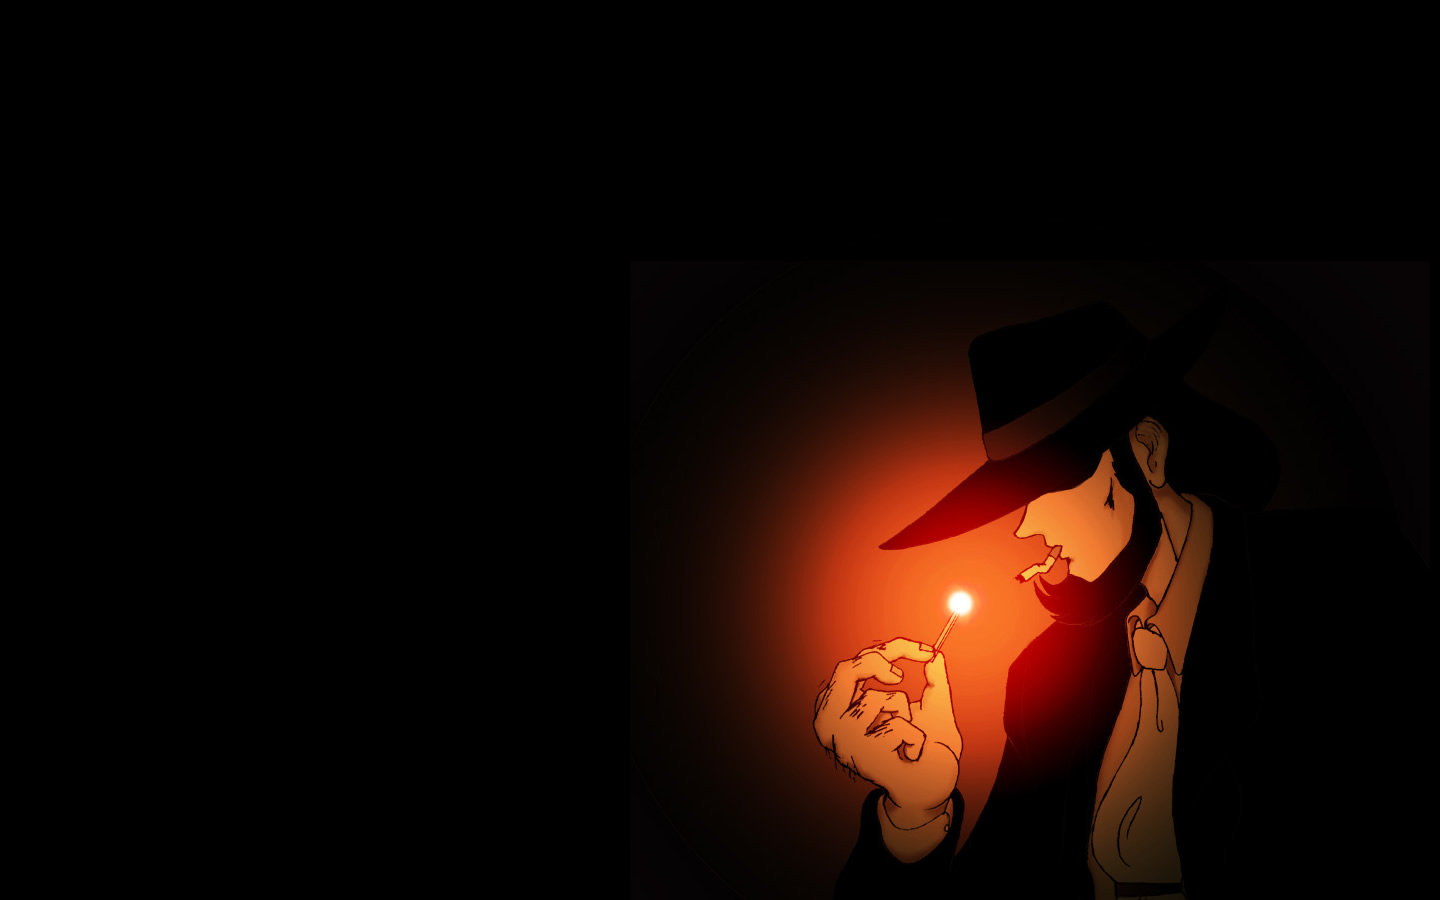 Lupin The Third (3rd III) wallpapers for 1440x900 desktop backgrounds. 